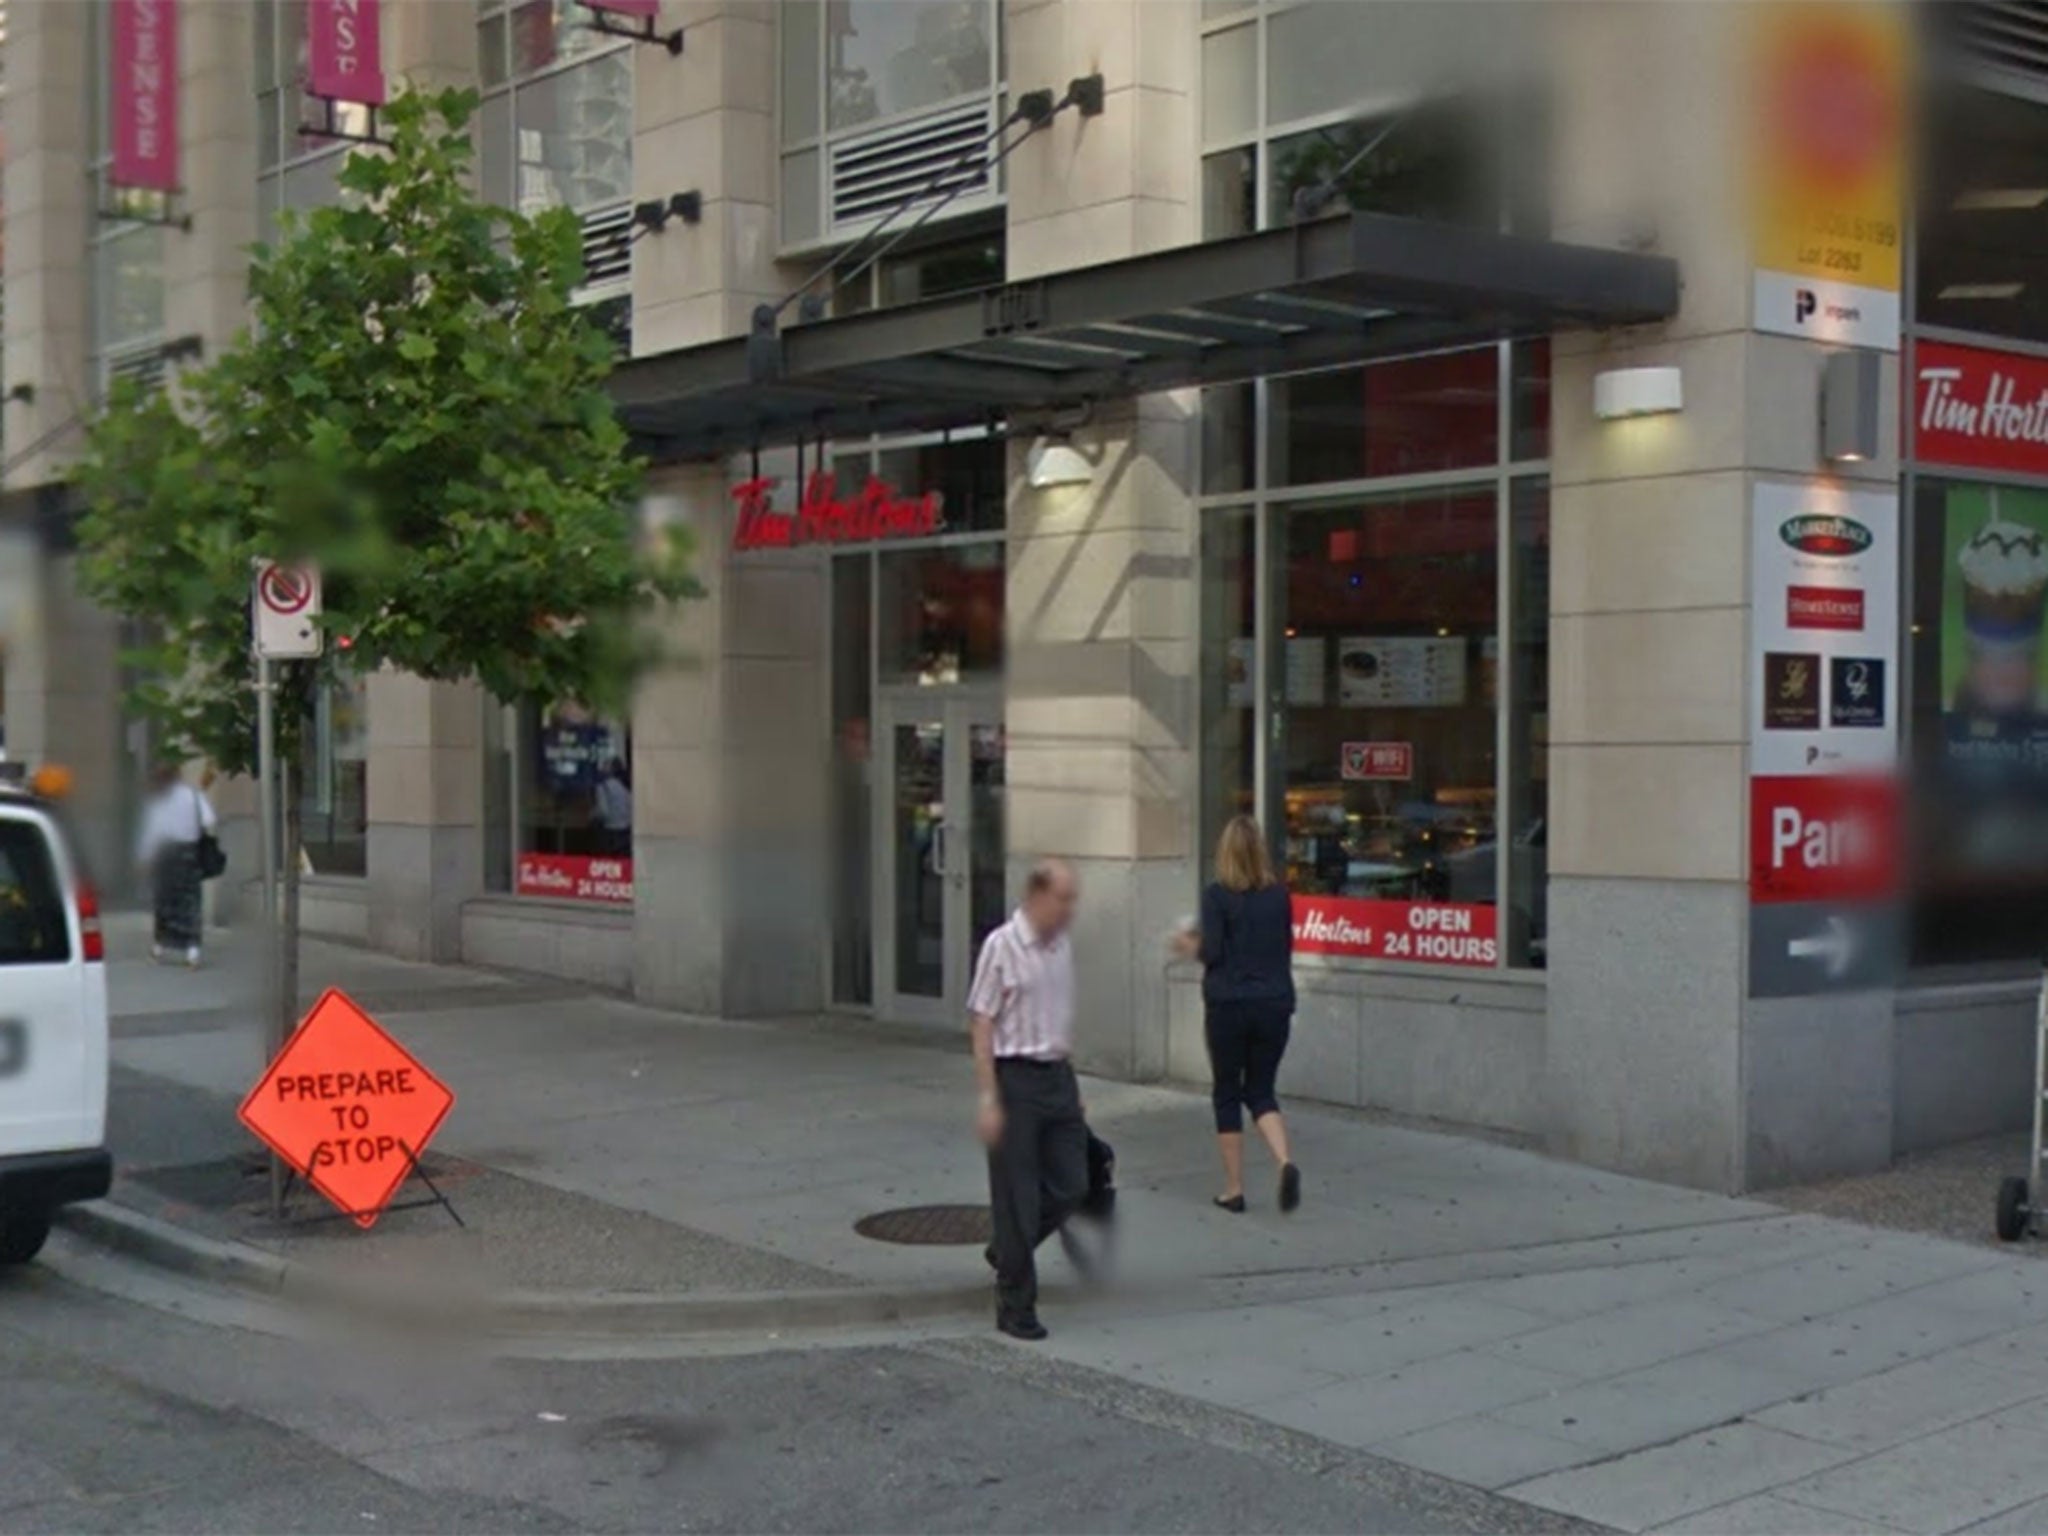 The branch of Tim Hortons in Vancouver